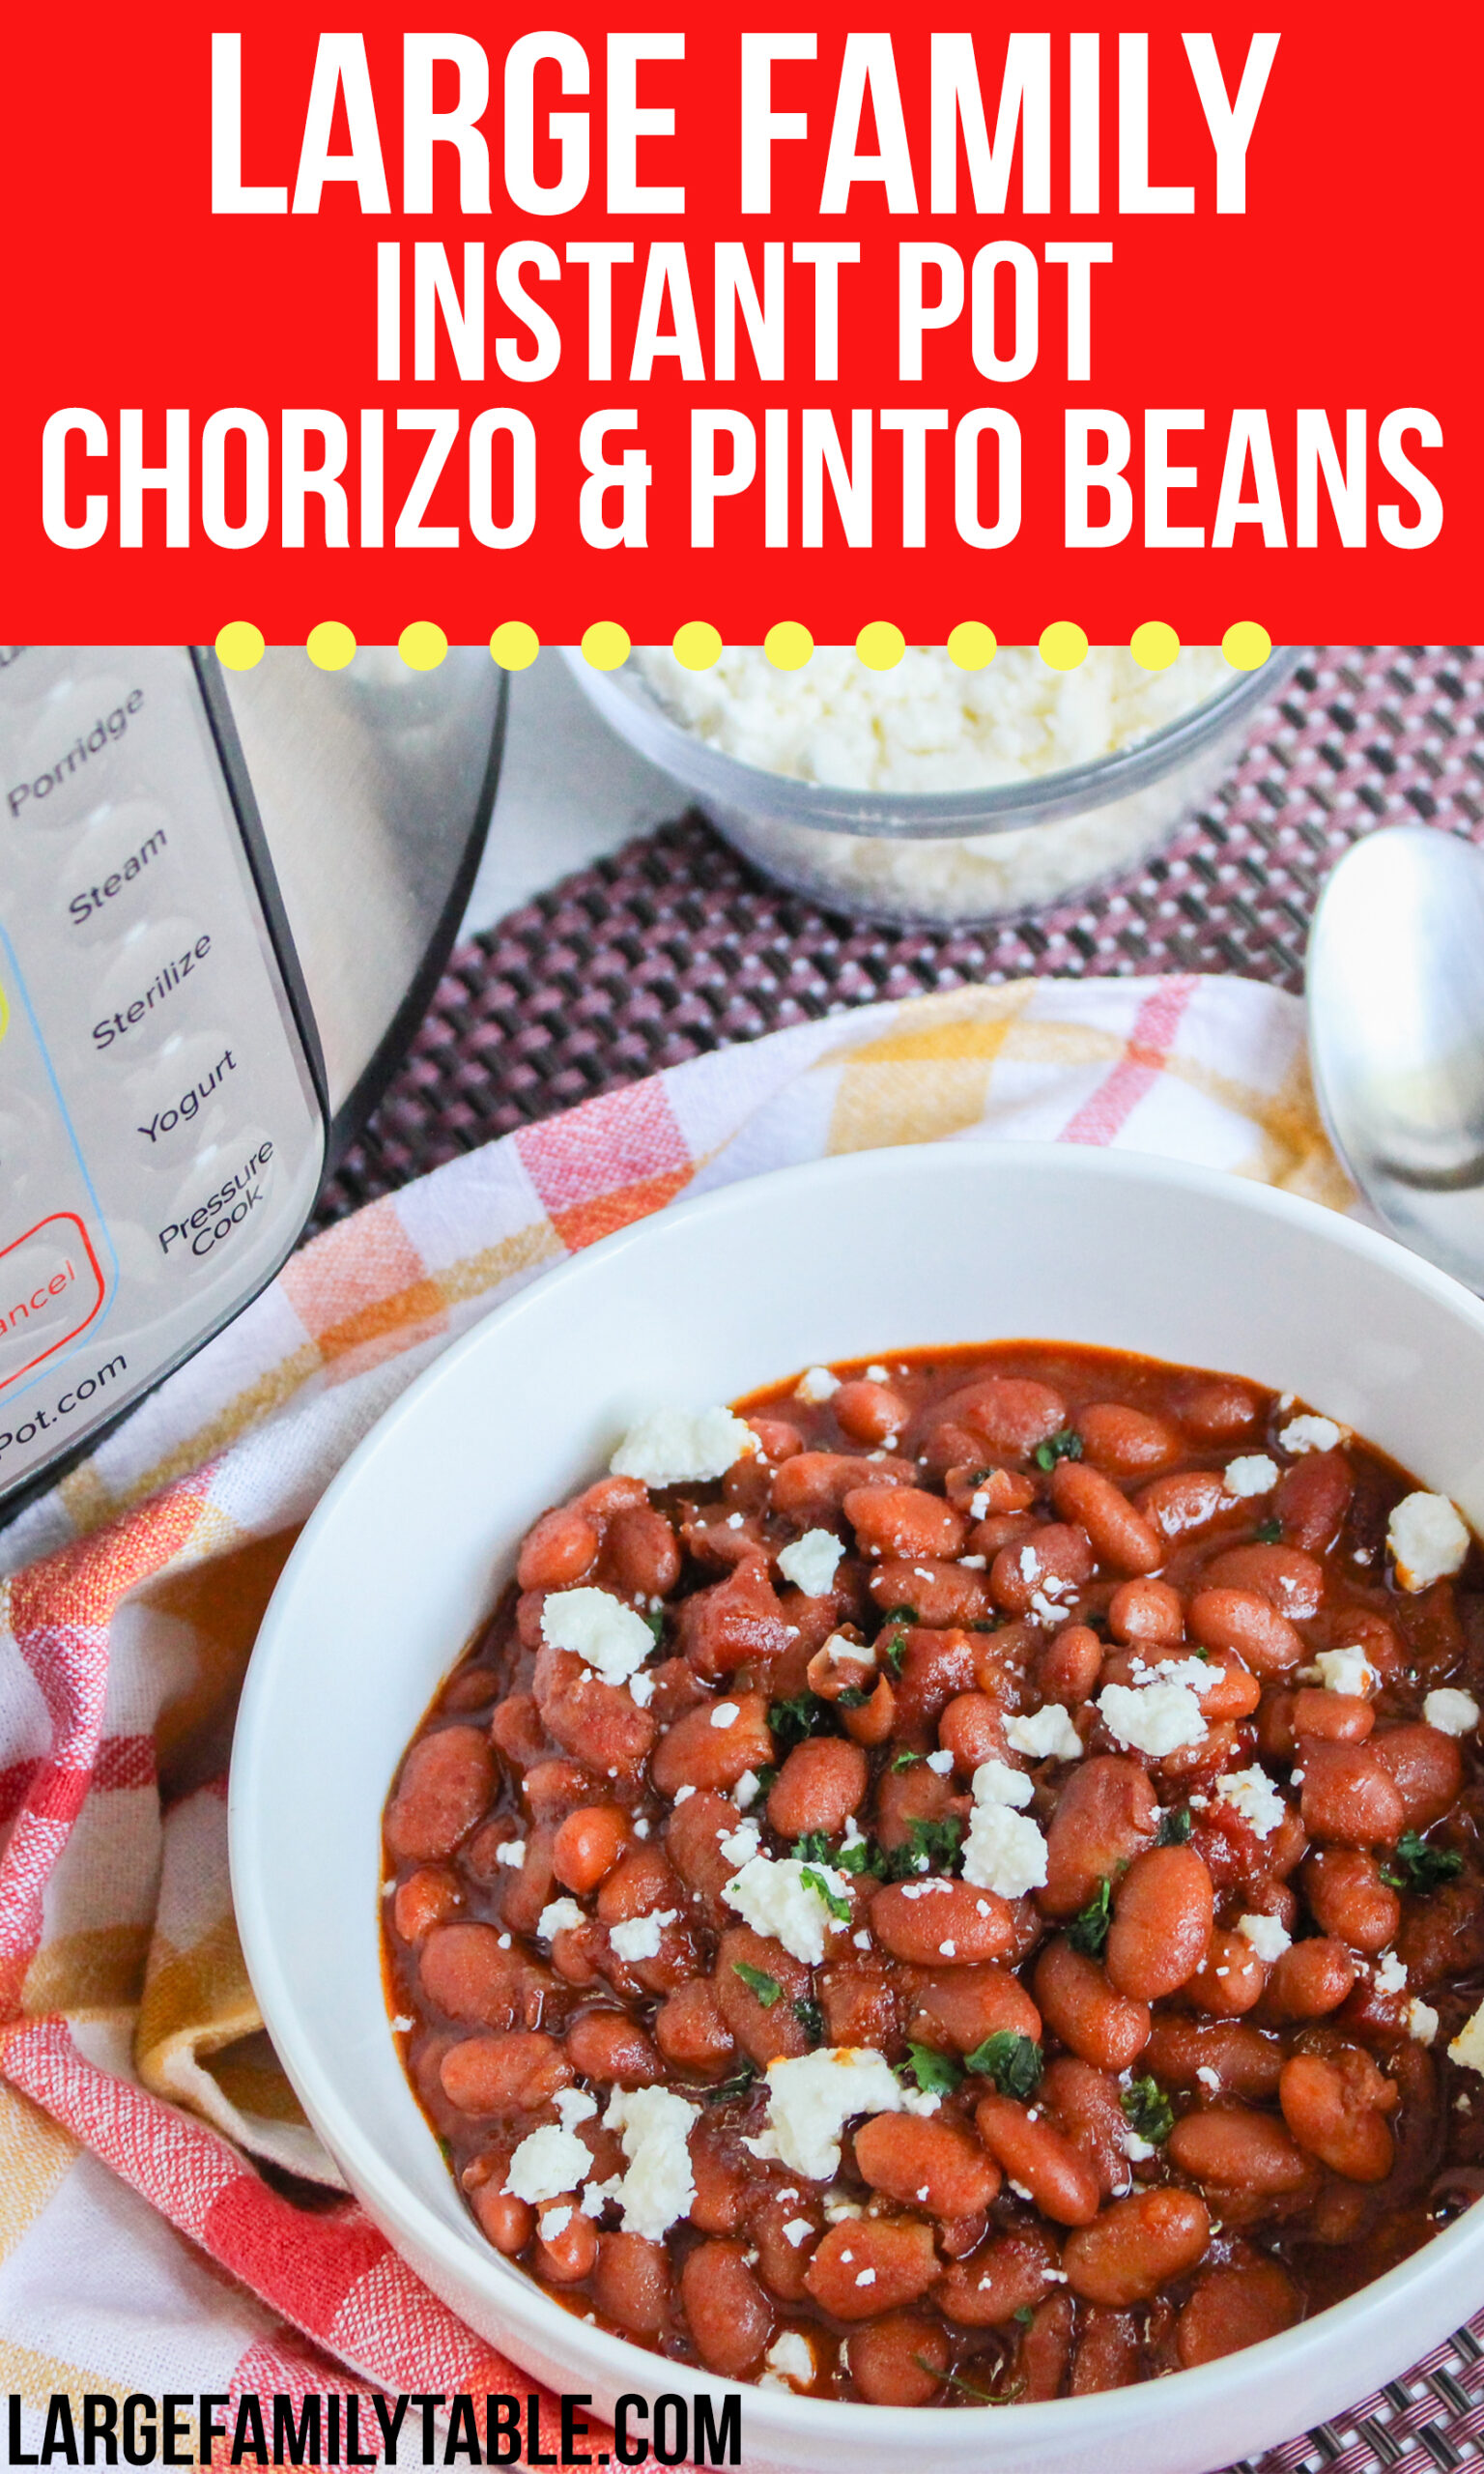 Large Family Instant Pot Chorizo and Pinto beans